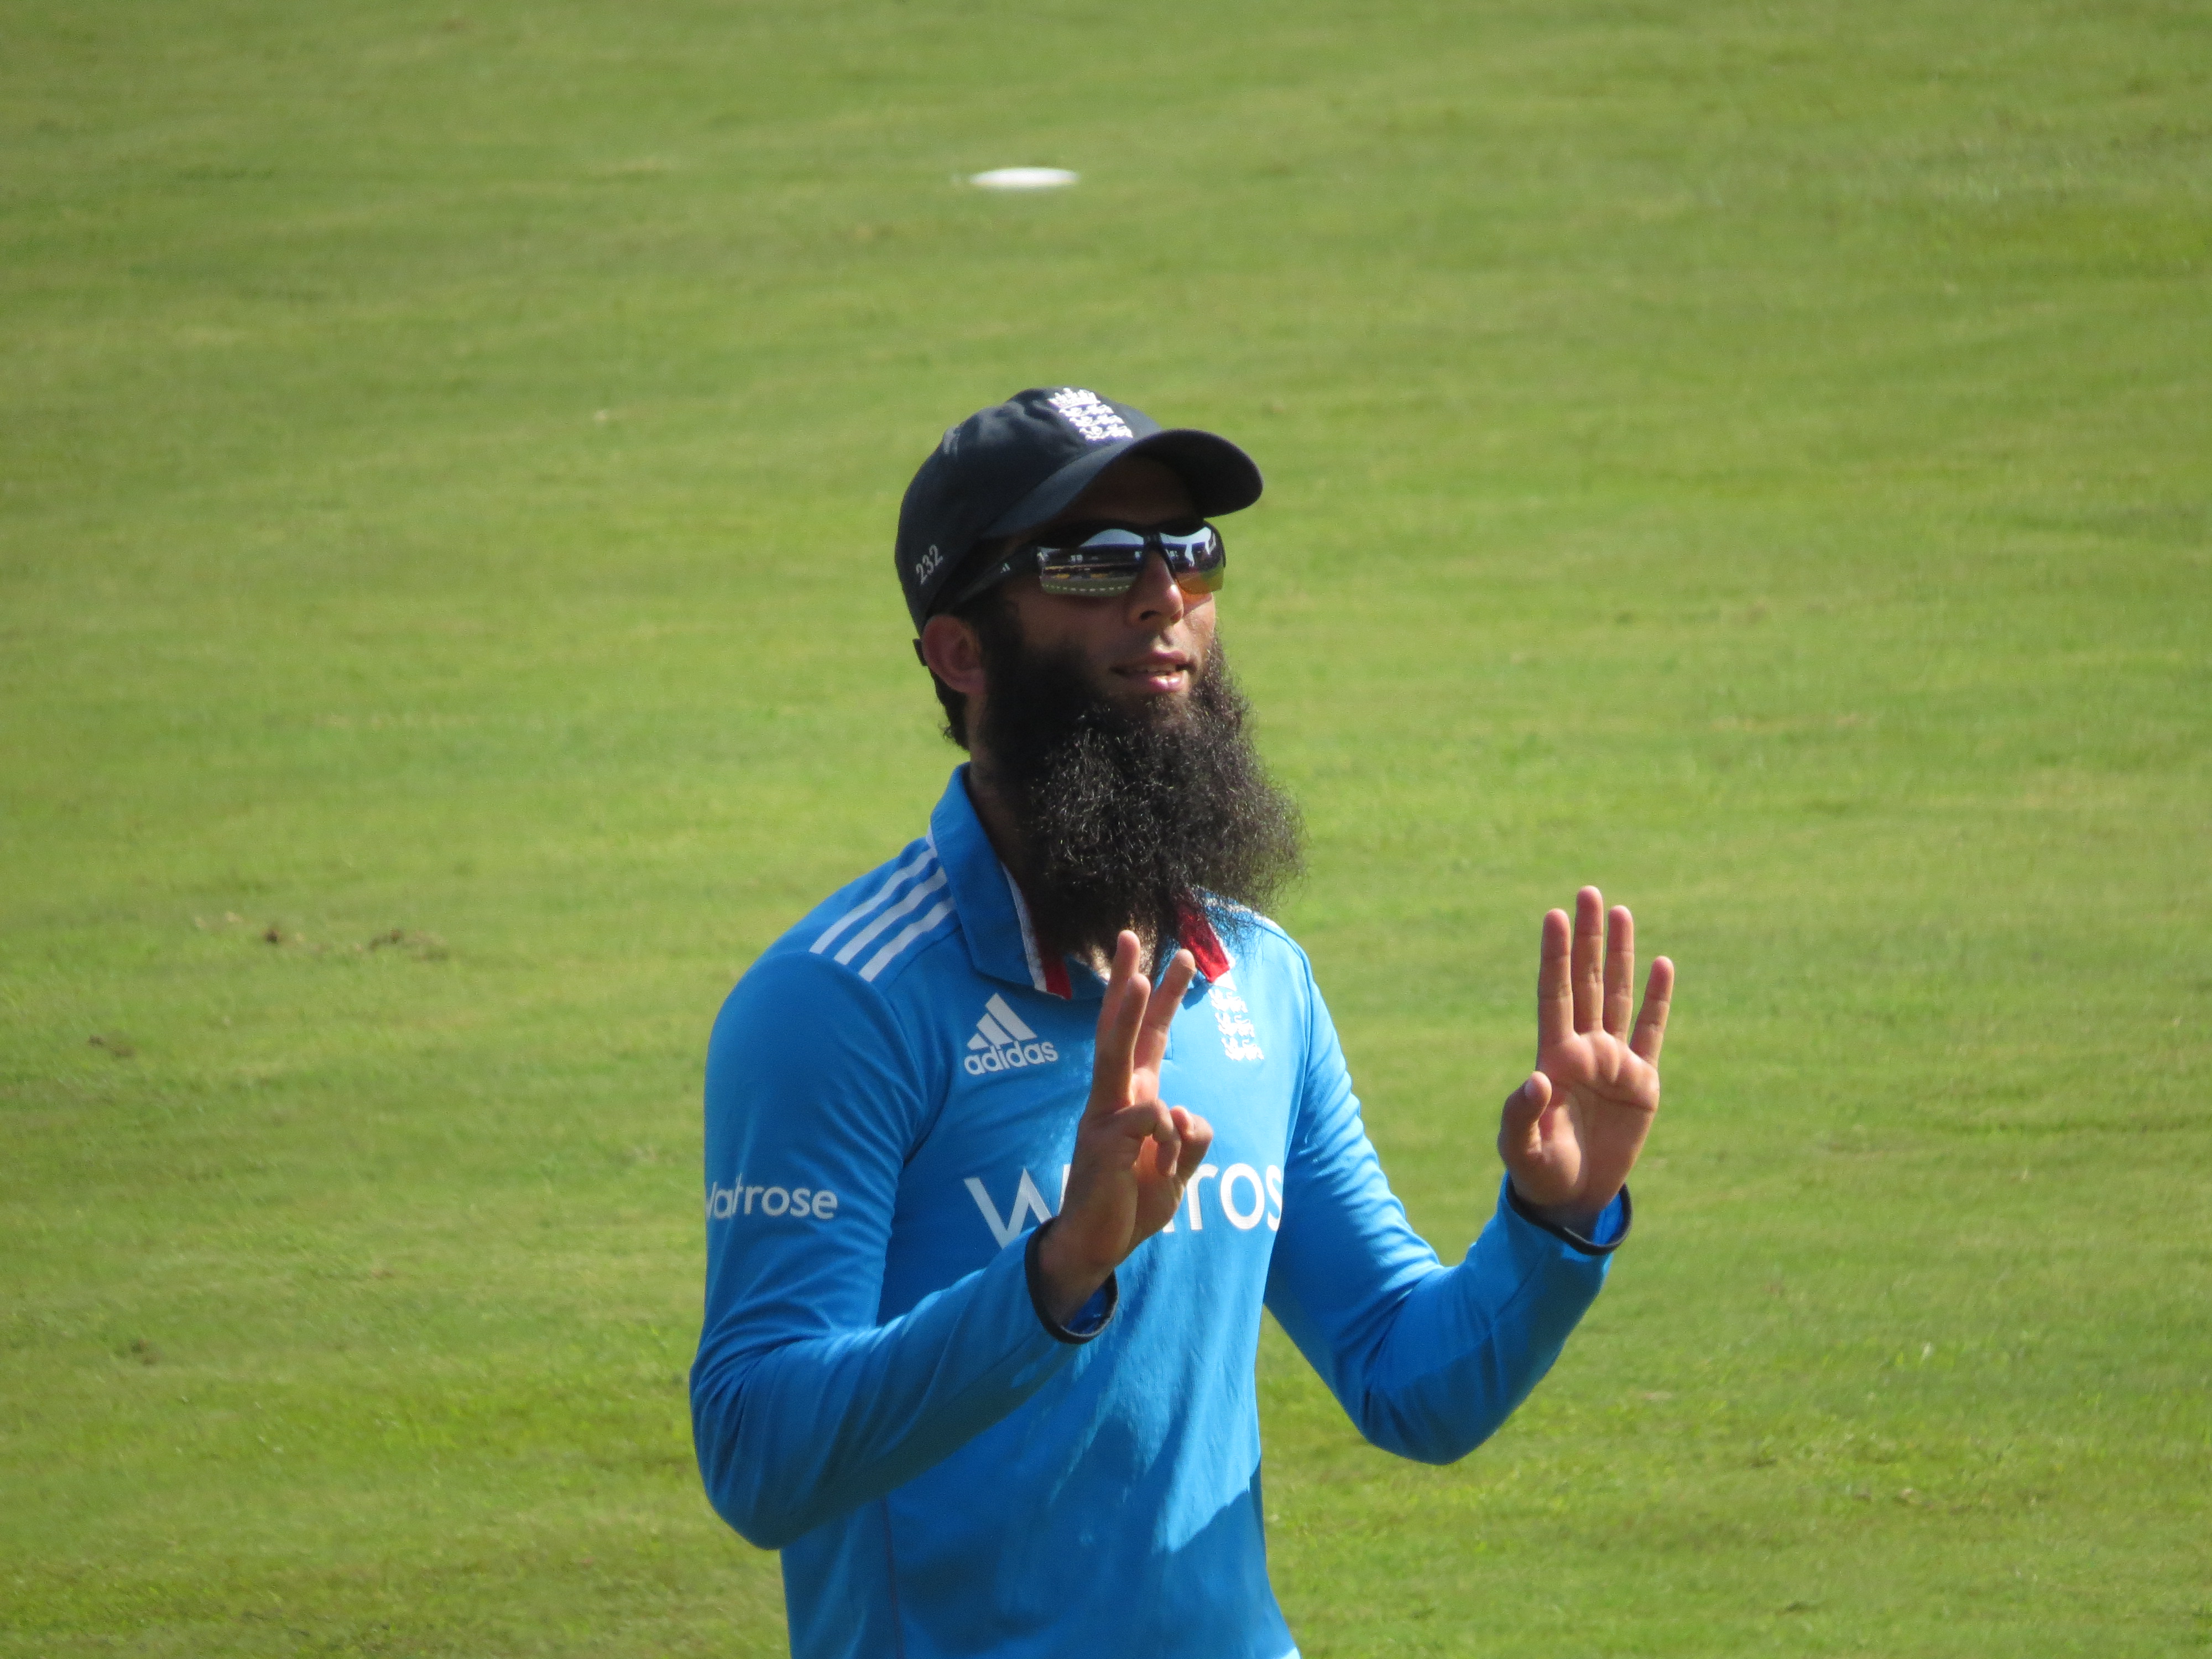 Moeen stars as England post 204-7 in 2nd T20